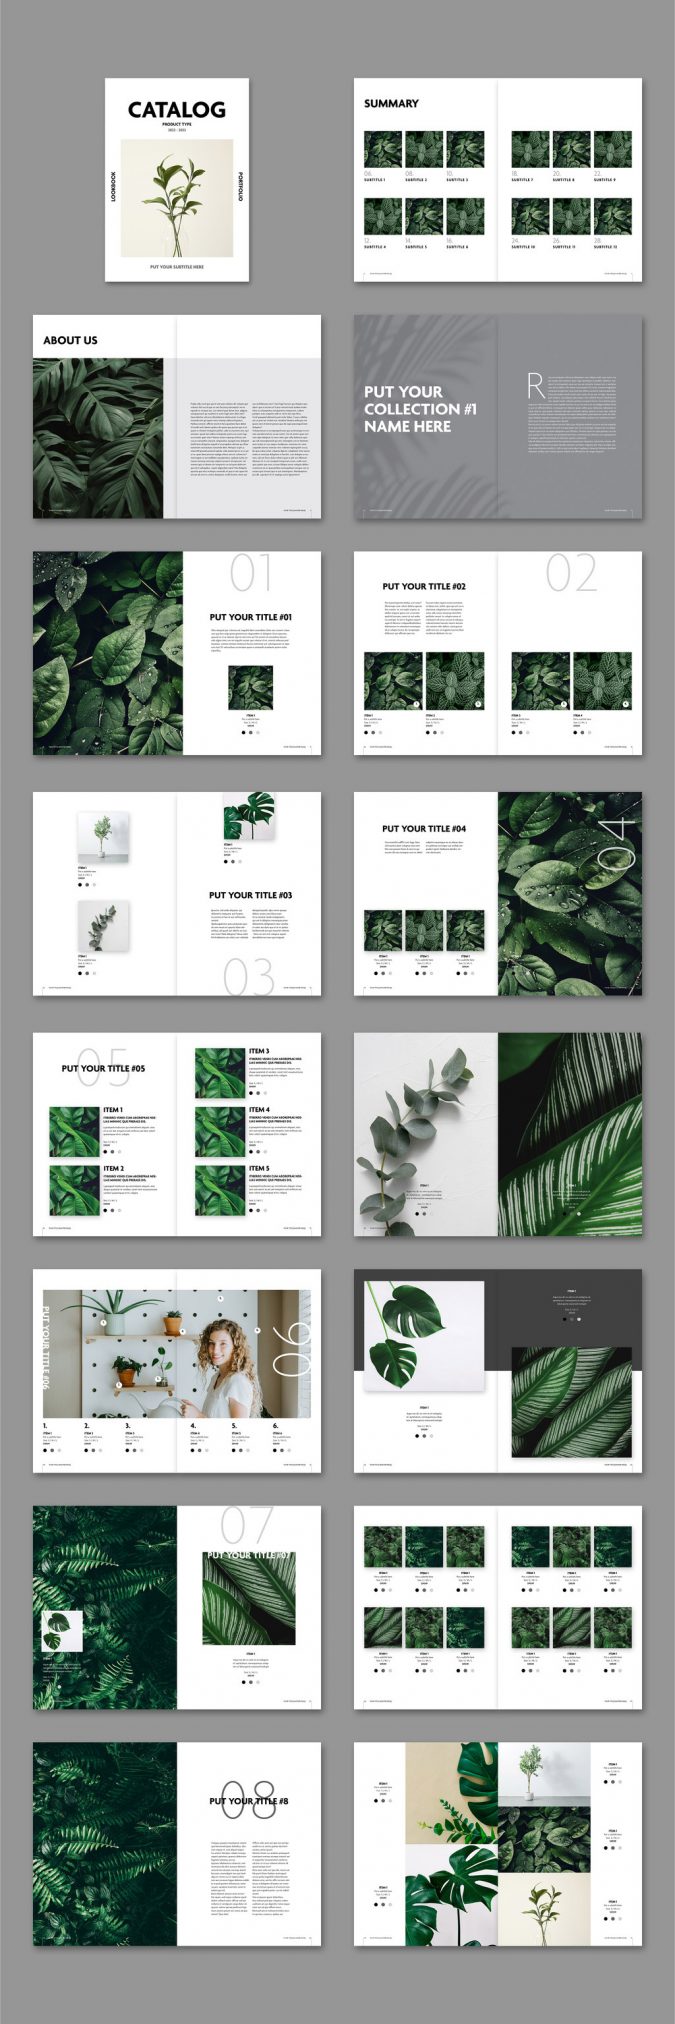 Download Catalog Adobe InDesign Template by Tom Sarraipo